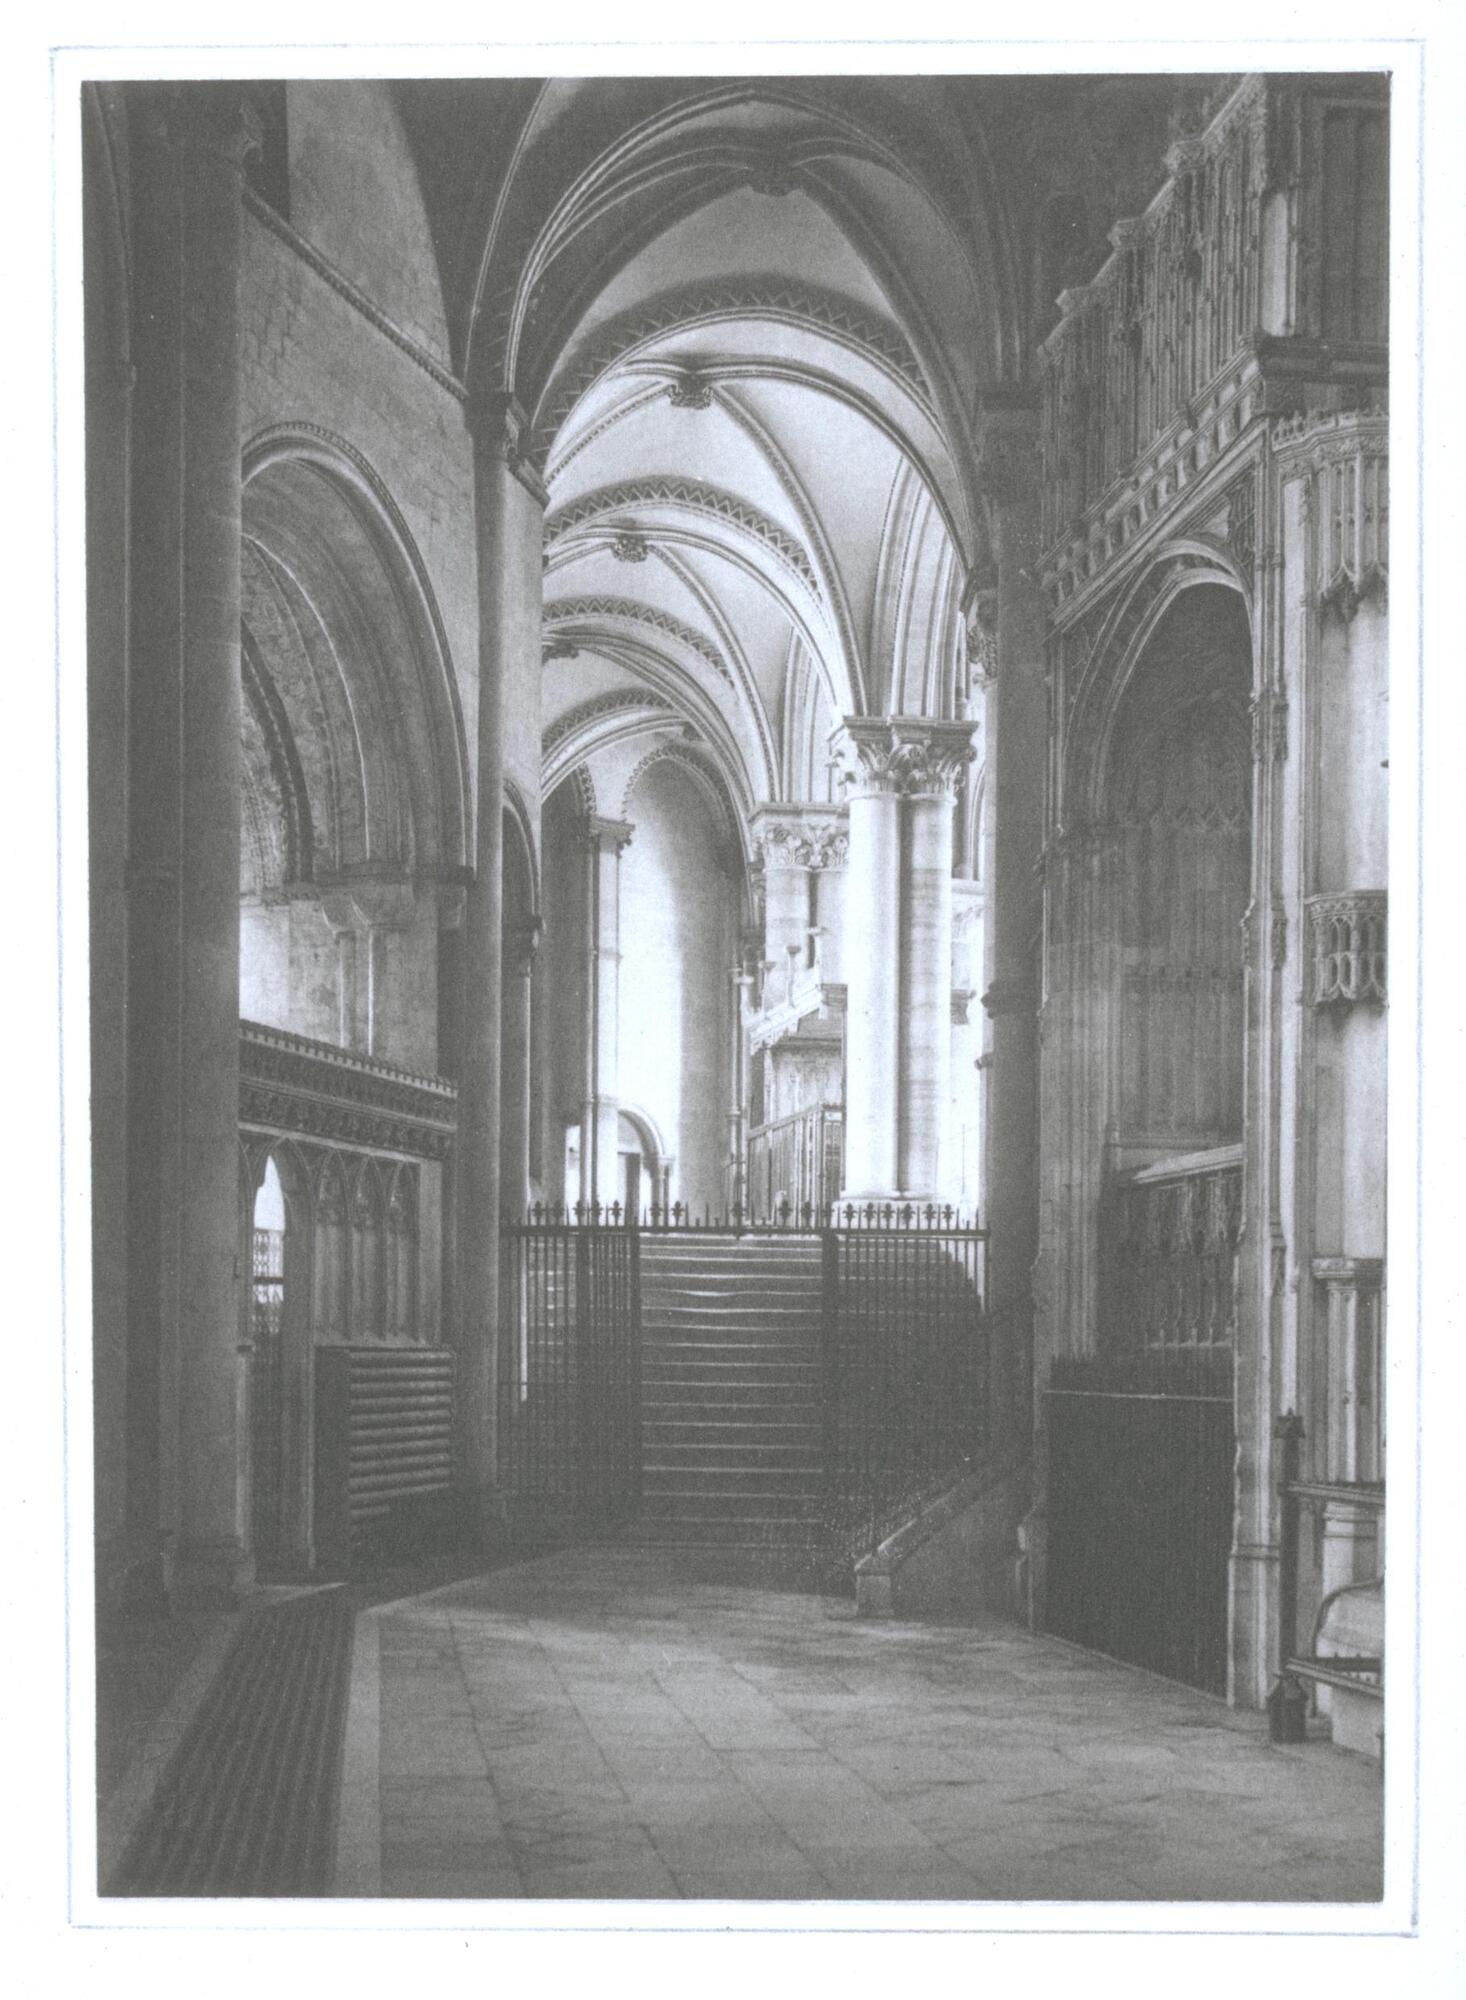 Photograph of a view looking into the choir of Canterbury Cathedral. Of central focus are the pilgrim steps leading into the choir. This image depicts the combined Romanesque and Gothic architecture of the cathedral.